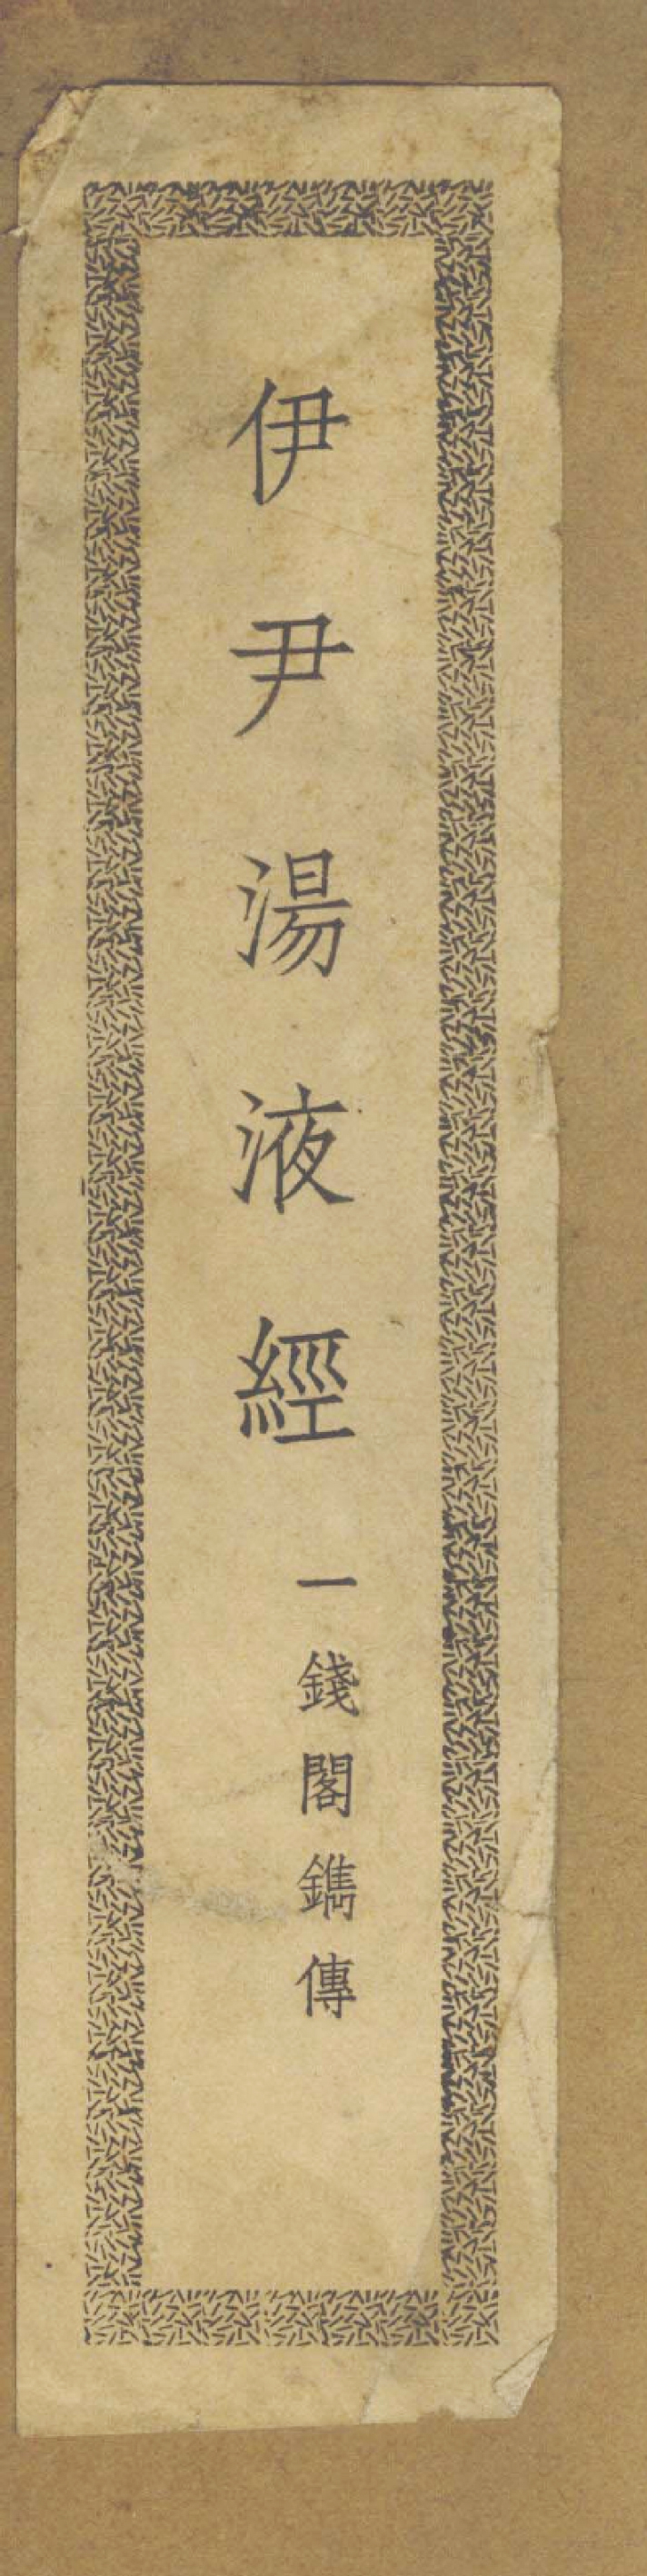 The title printed on the front cover, i.e. Yi Yin Tang Ye Jing 伊尹湯液經 (Yi Yin’s Classic of Decoction). Below the title are the five characters ‘Yi Qian Ge Juan Zhuan 一錢閣鐫傳’ (Engraved and Issued by the One-Coin Pavilion).